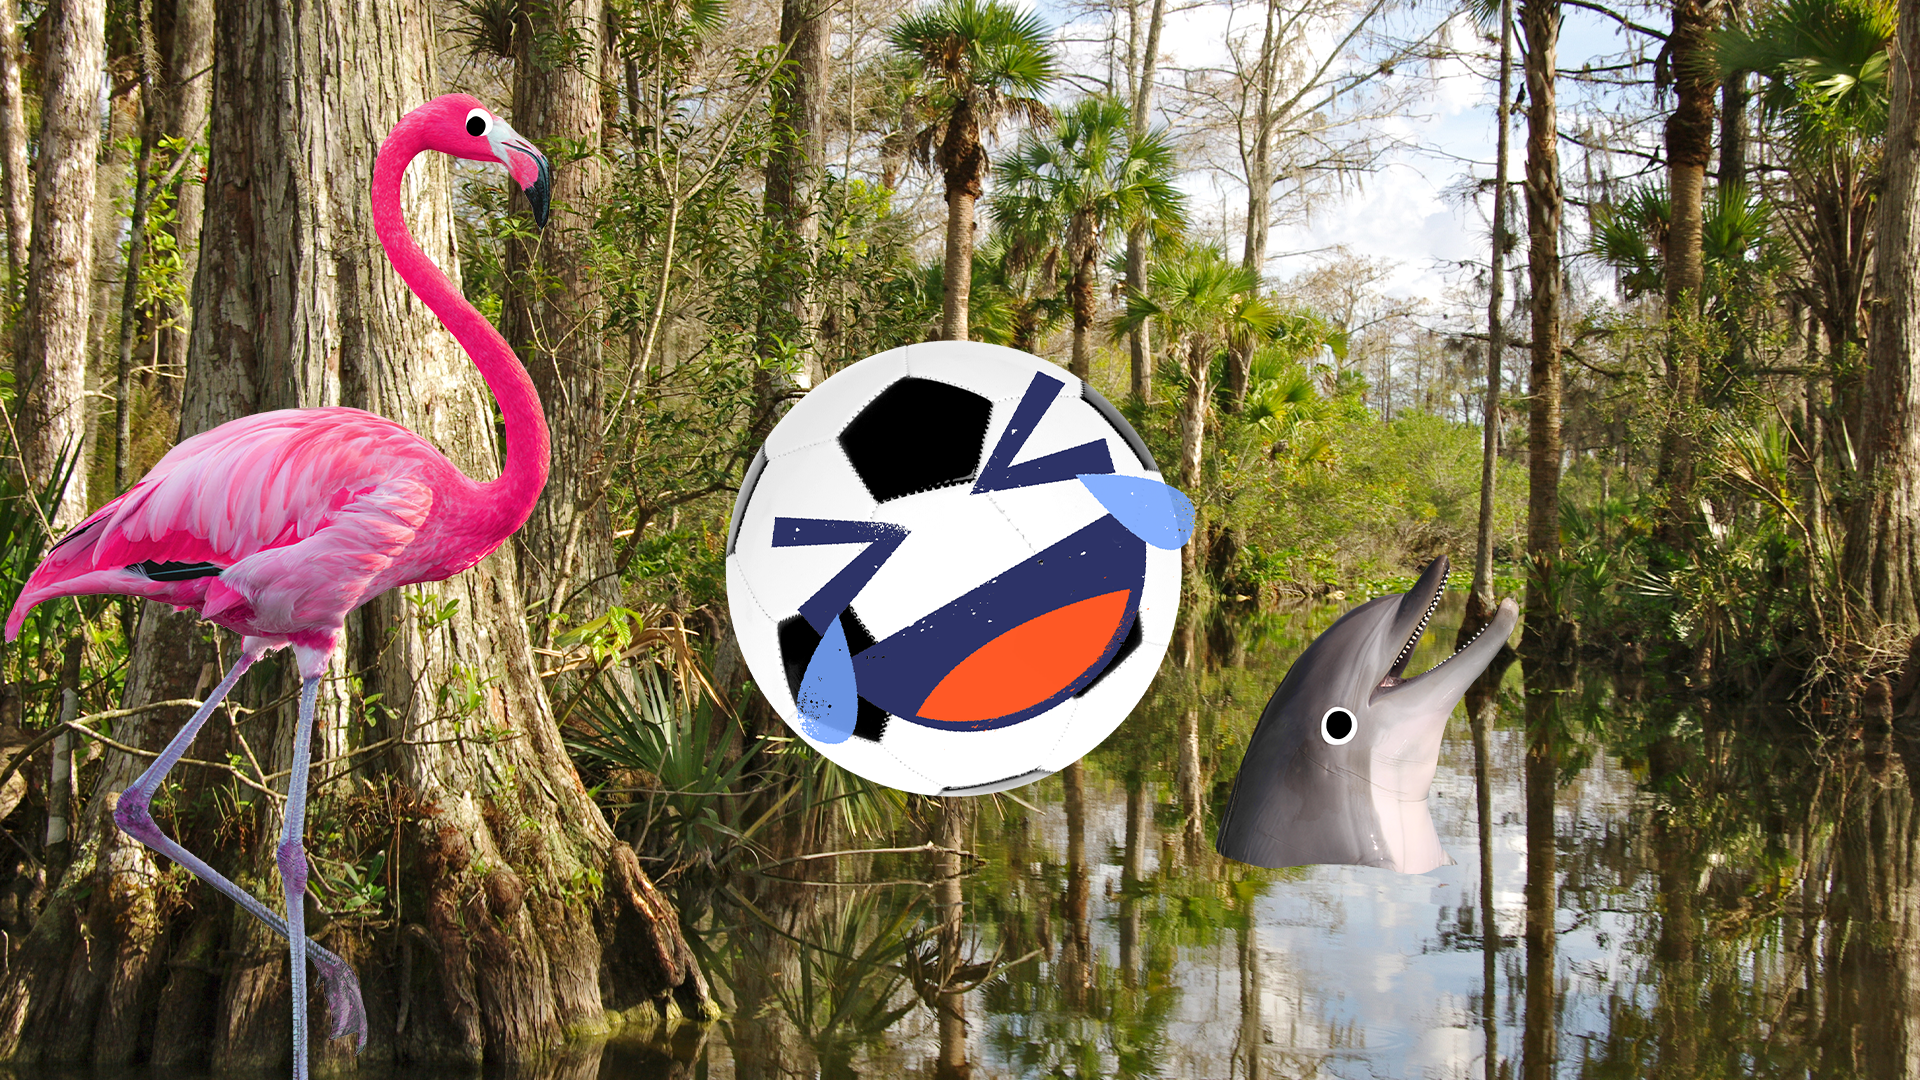 Florida swamp with laughing football, flamingo and dolphin